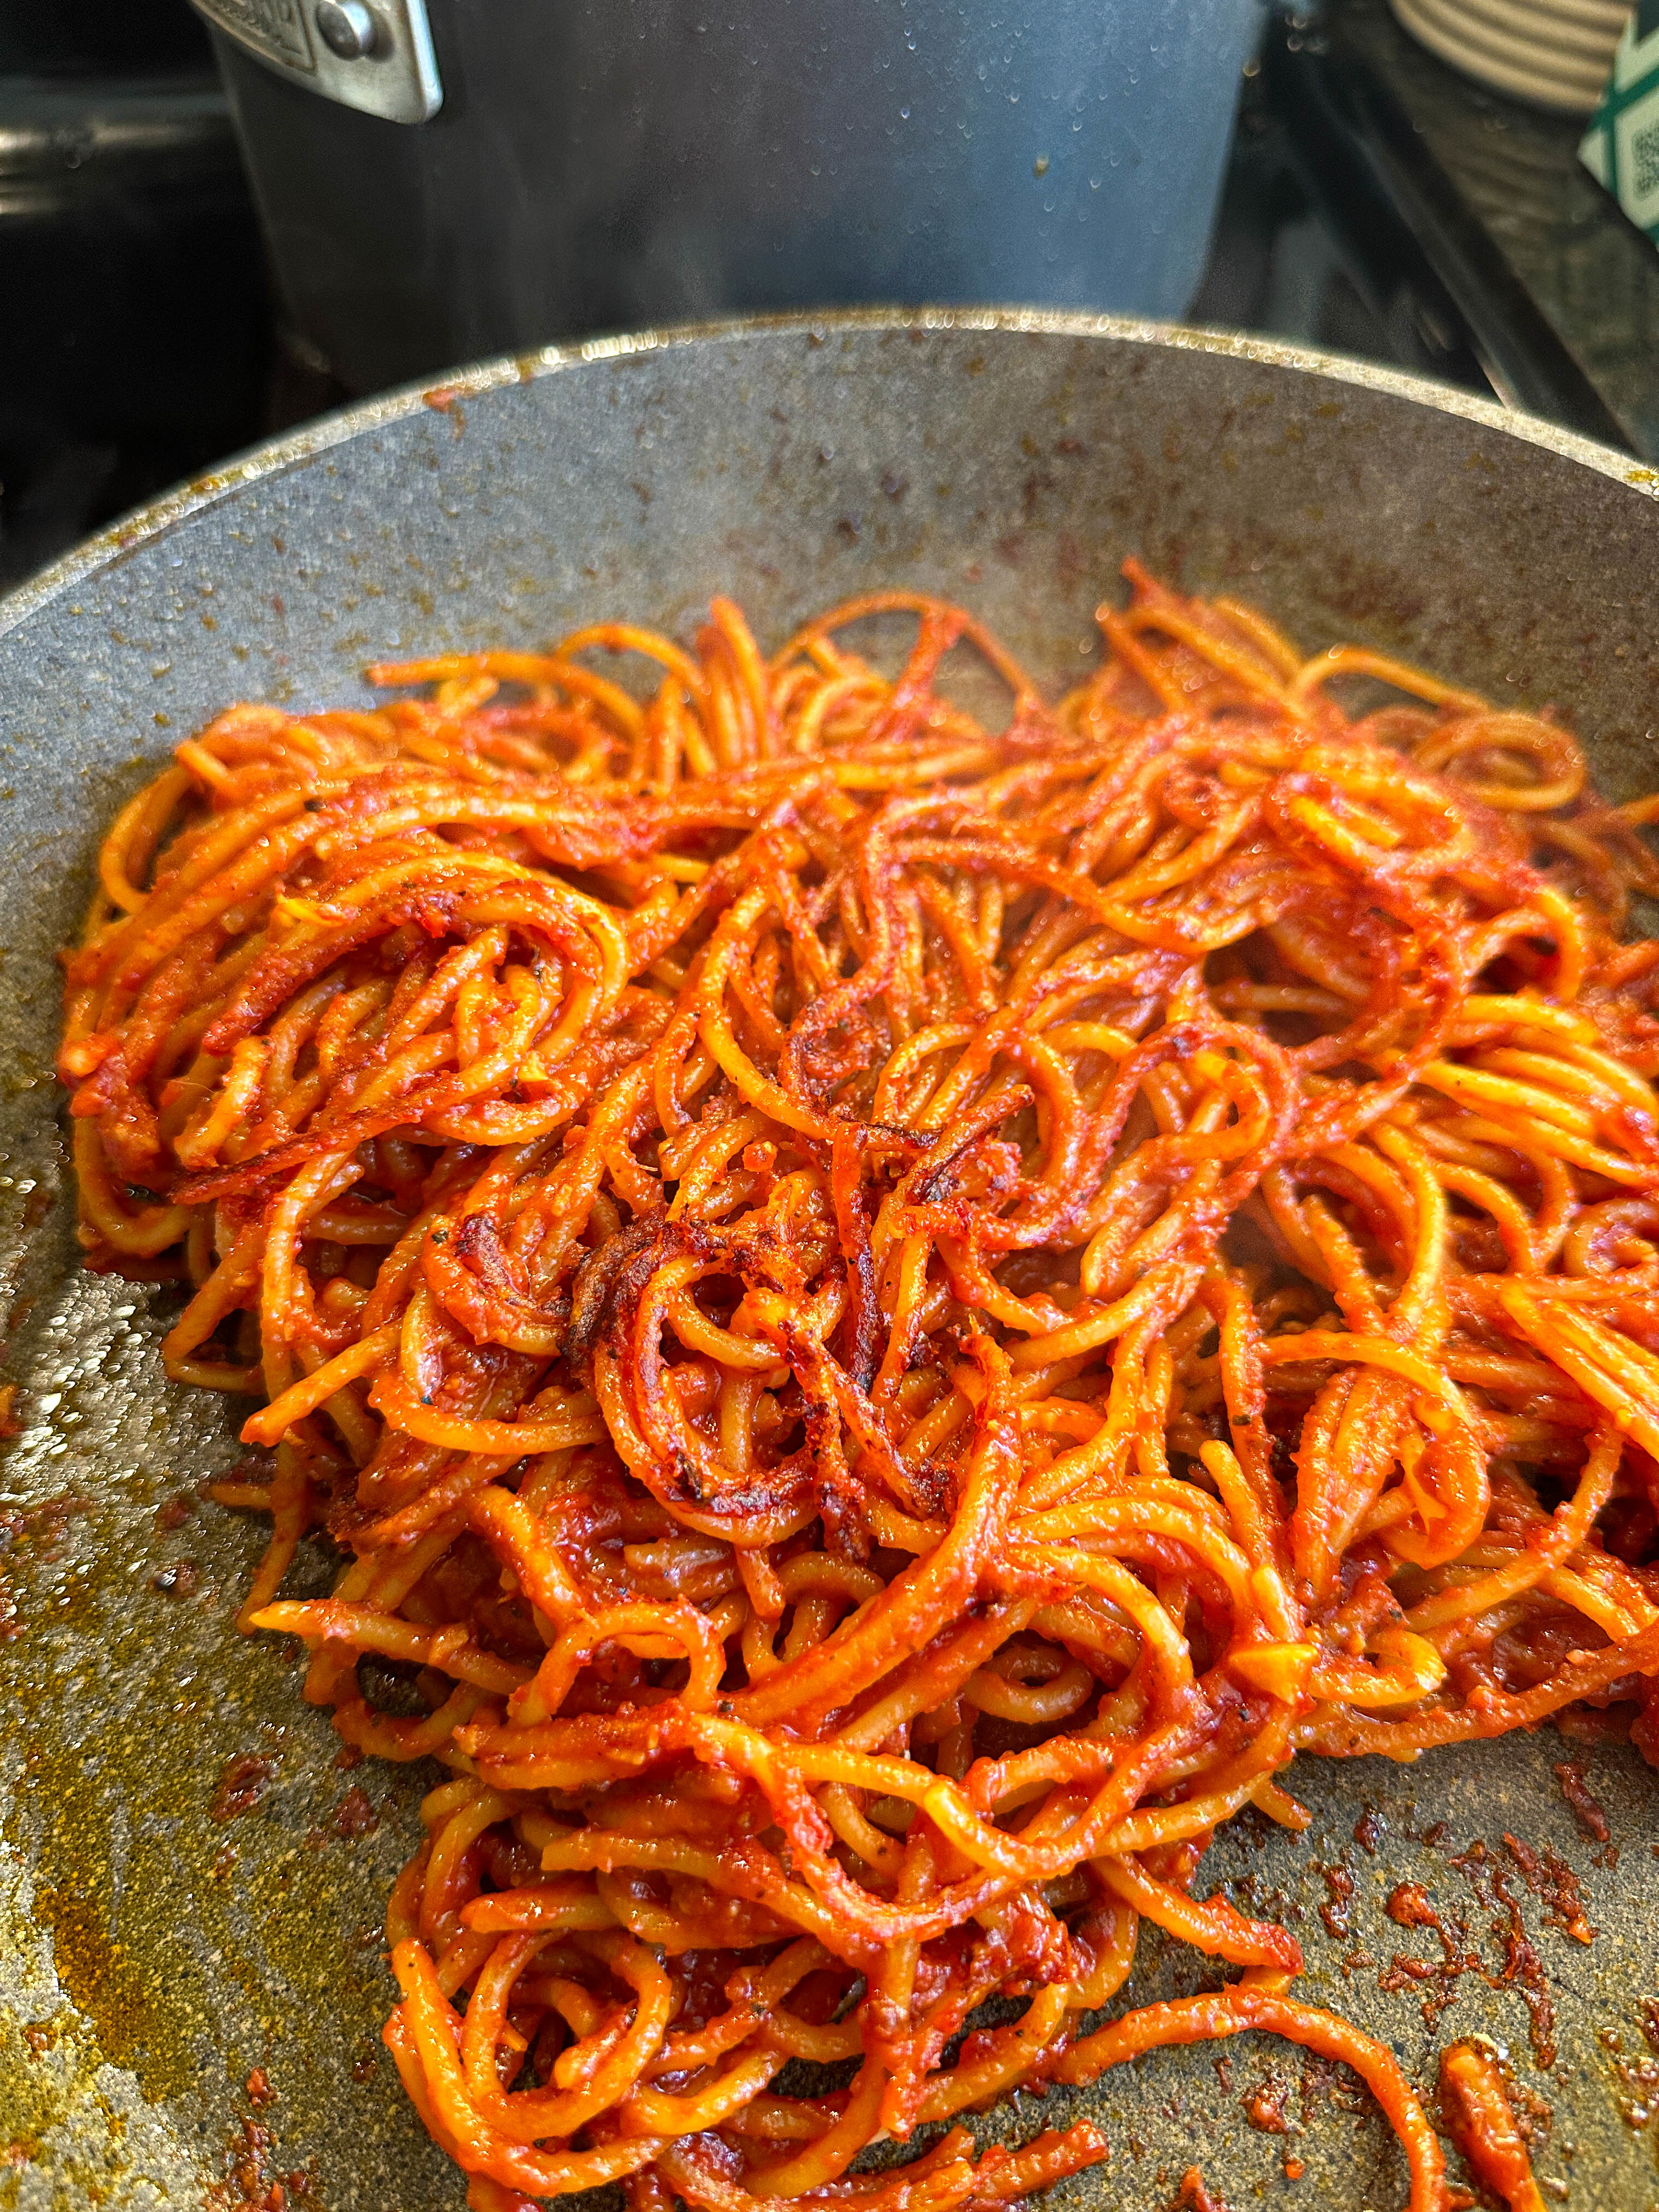 A pan of spaghetti with charred red sauce being cooked on a stove